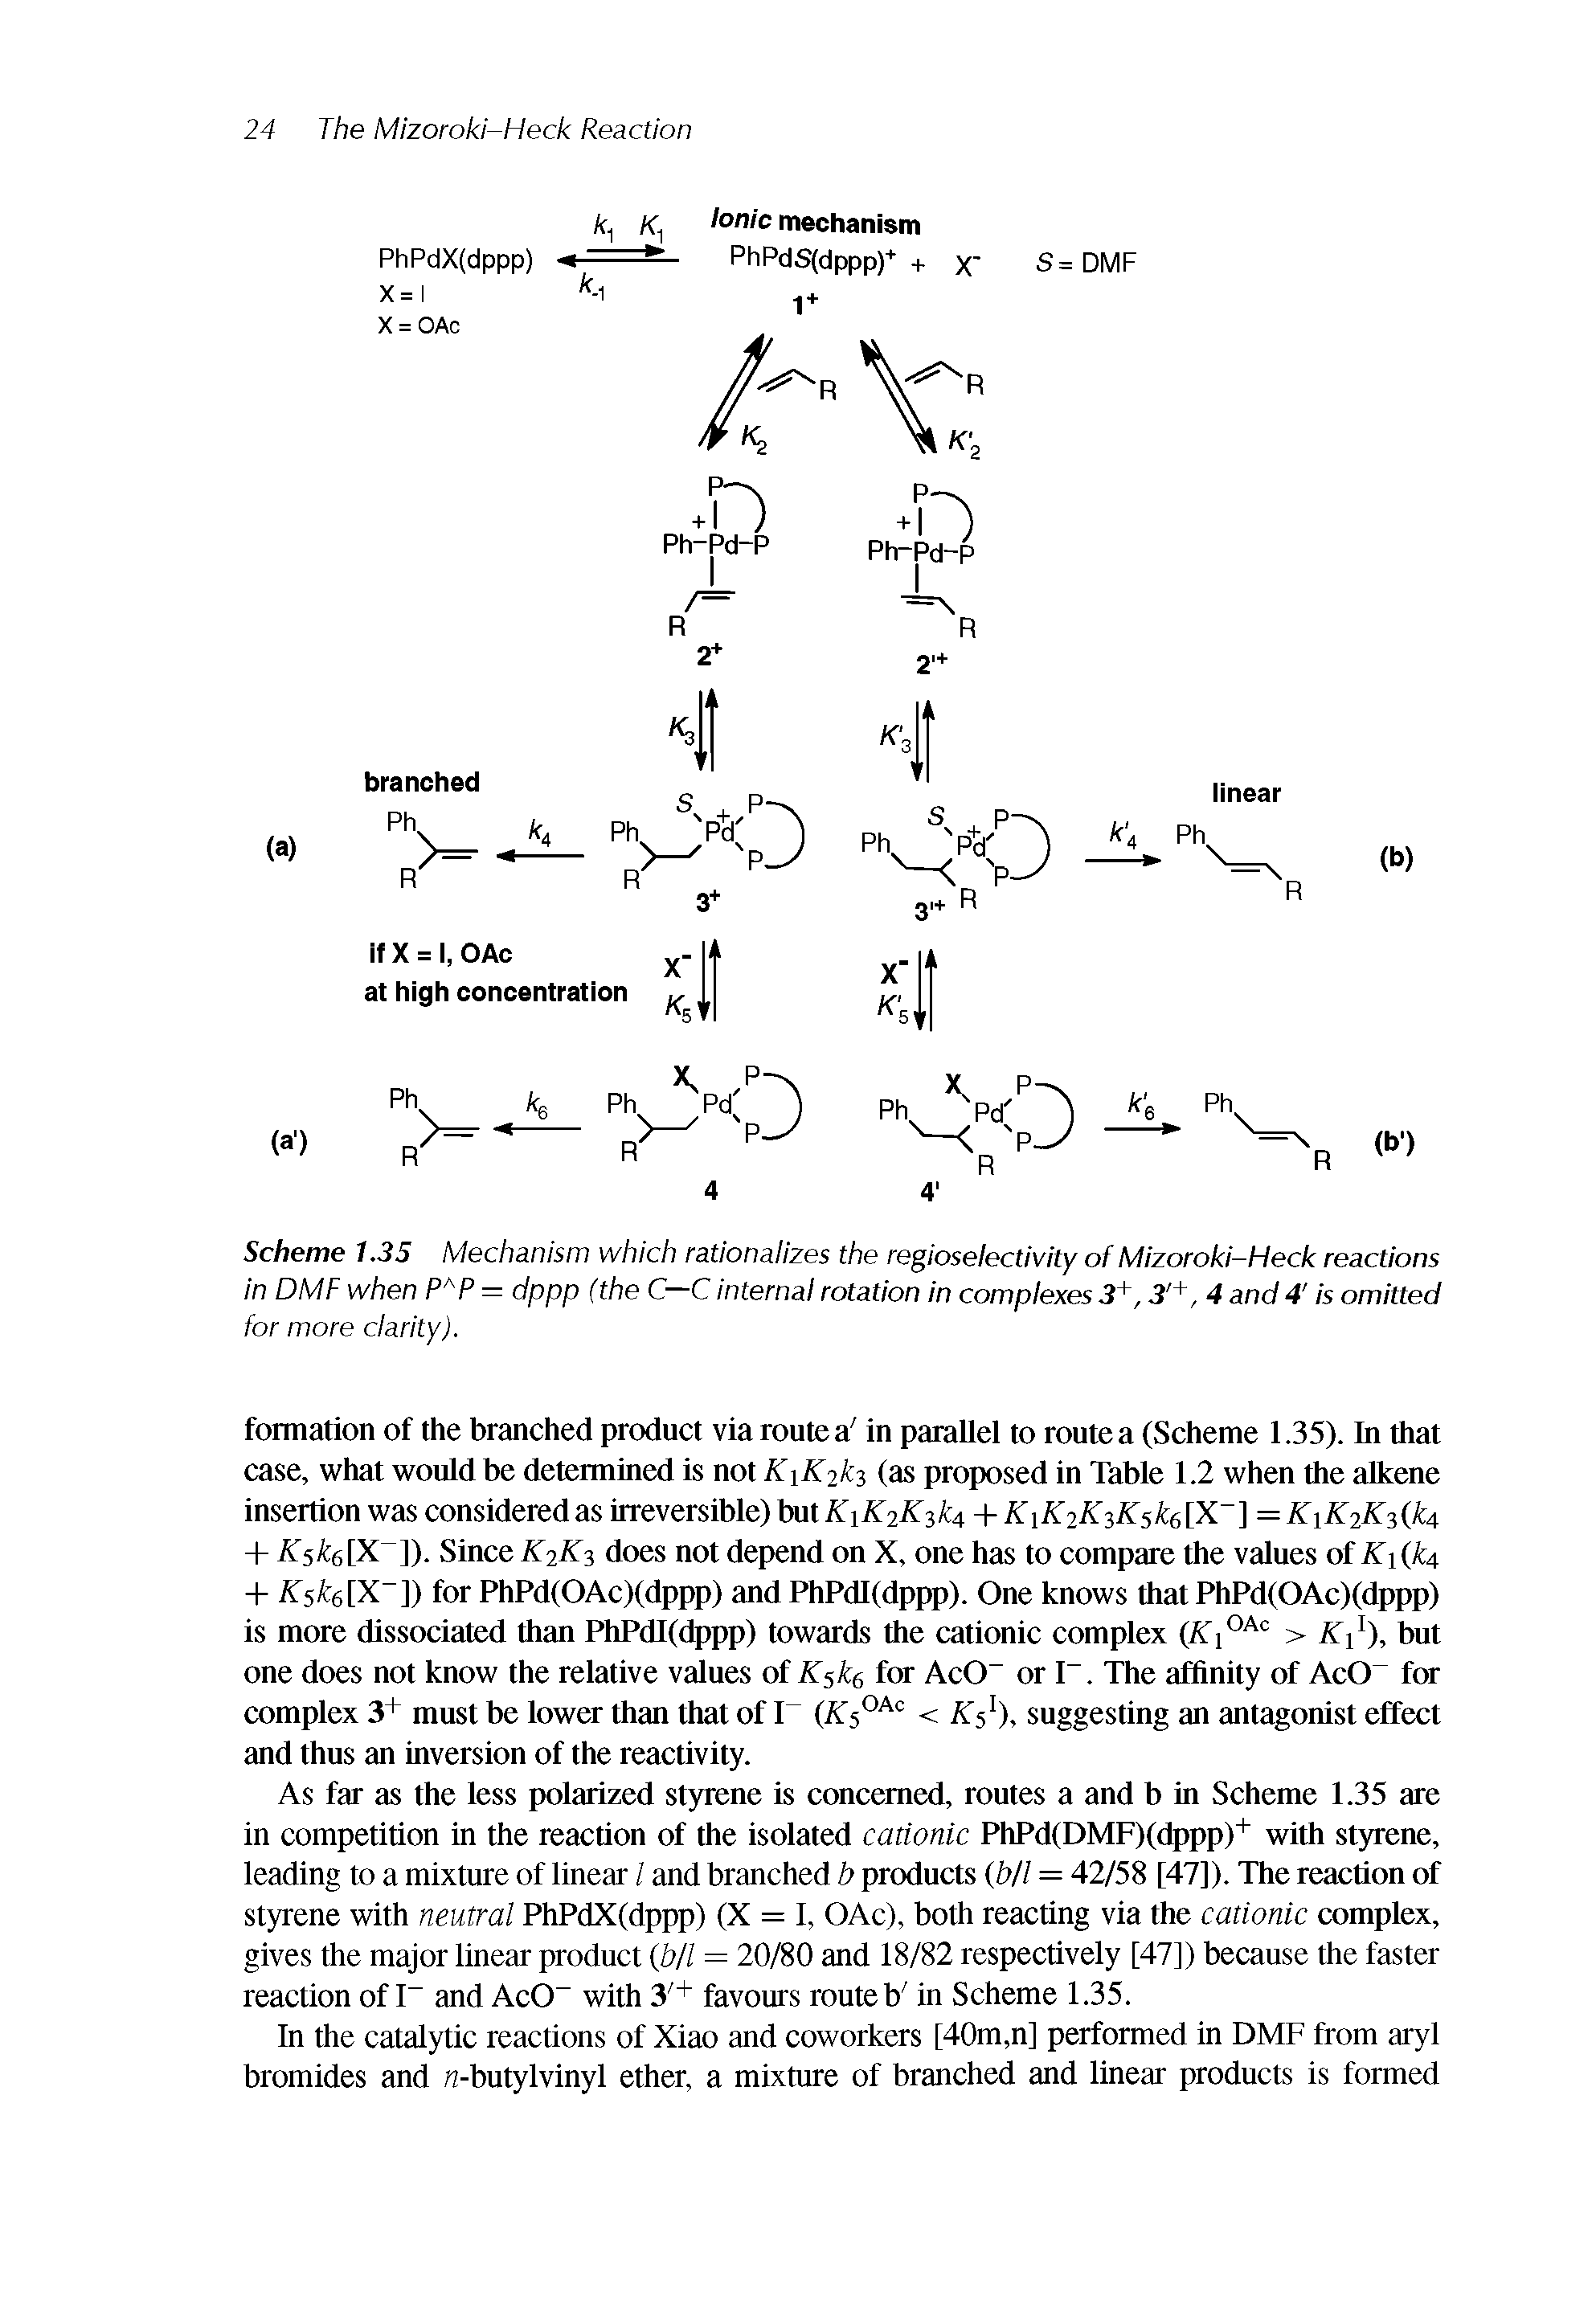 Scheme 1.35 Mechanism which rationalizes the regioselectivity of Mizoroki-Heck reactions in DMF when P P= dppp (the C—C internal rotation in complexes 3+, 3 +, 4 and 4 is omitted for more clarity).